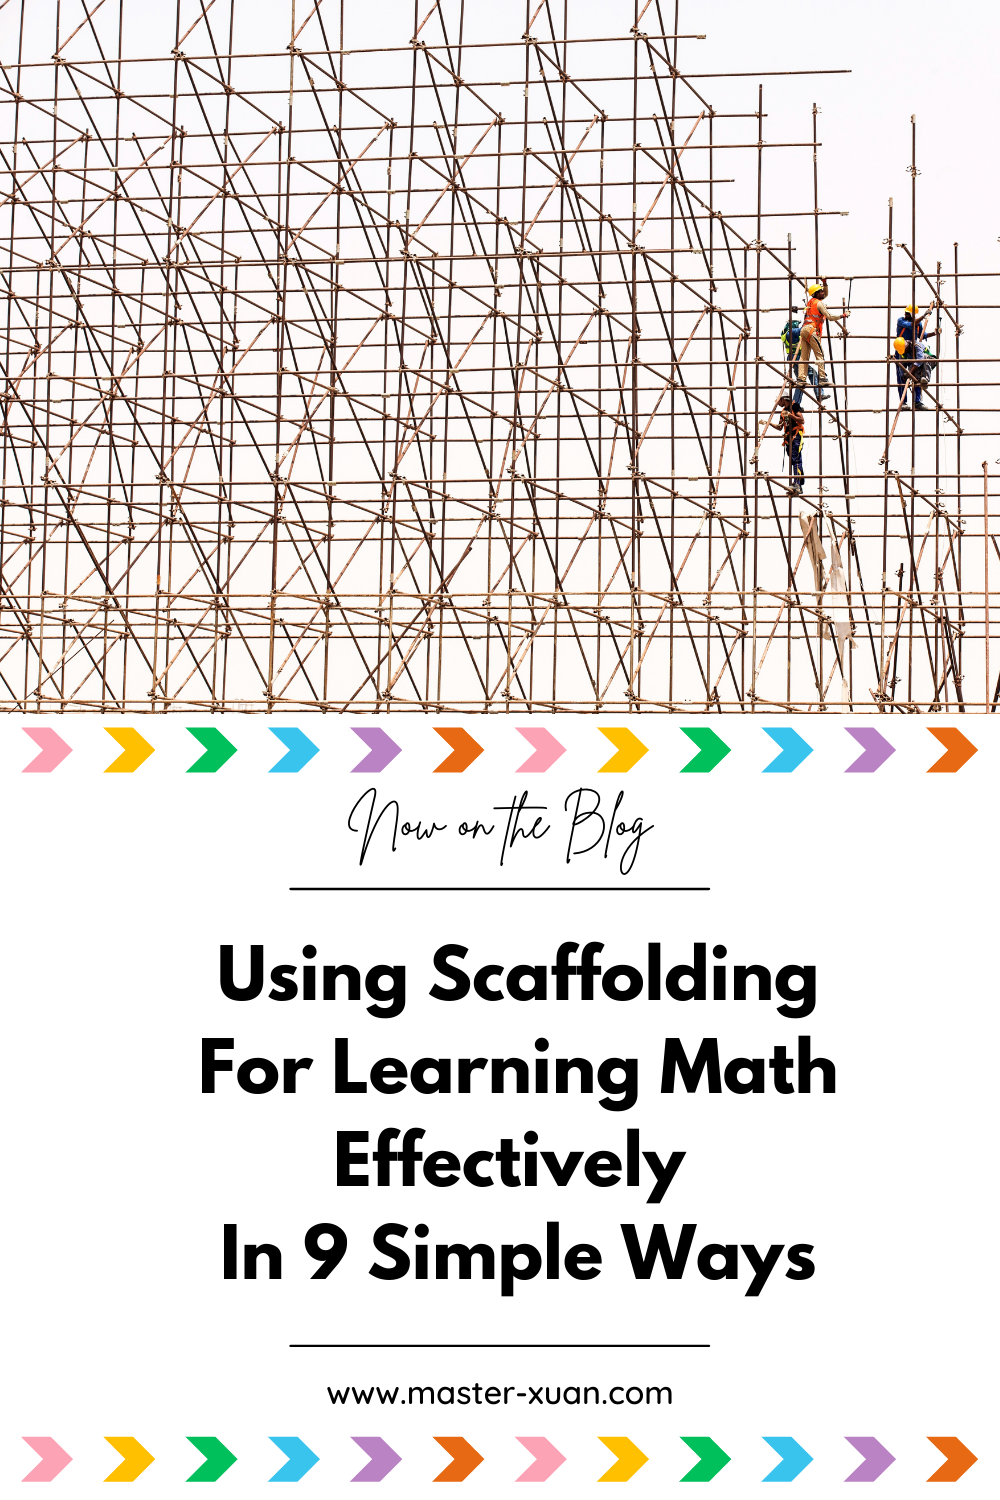 scaffolding for learning provides students support